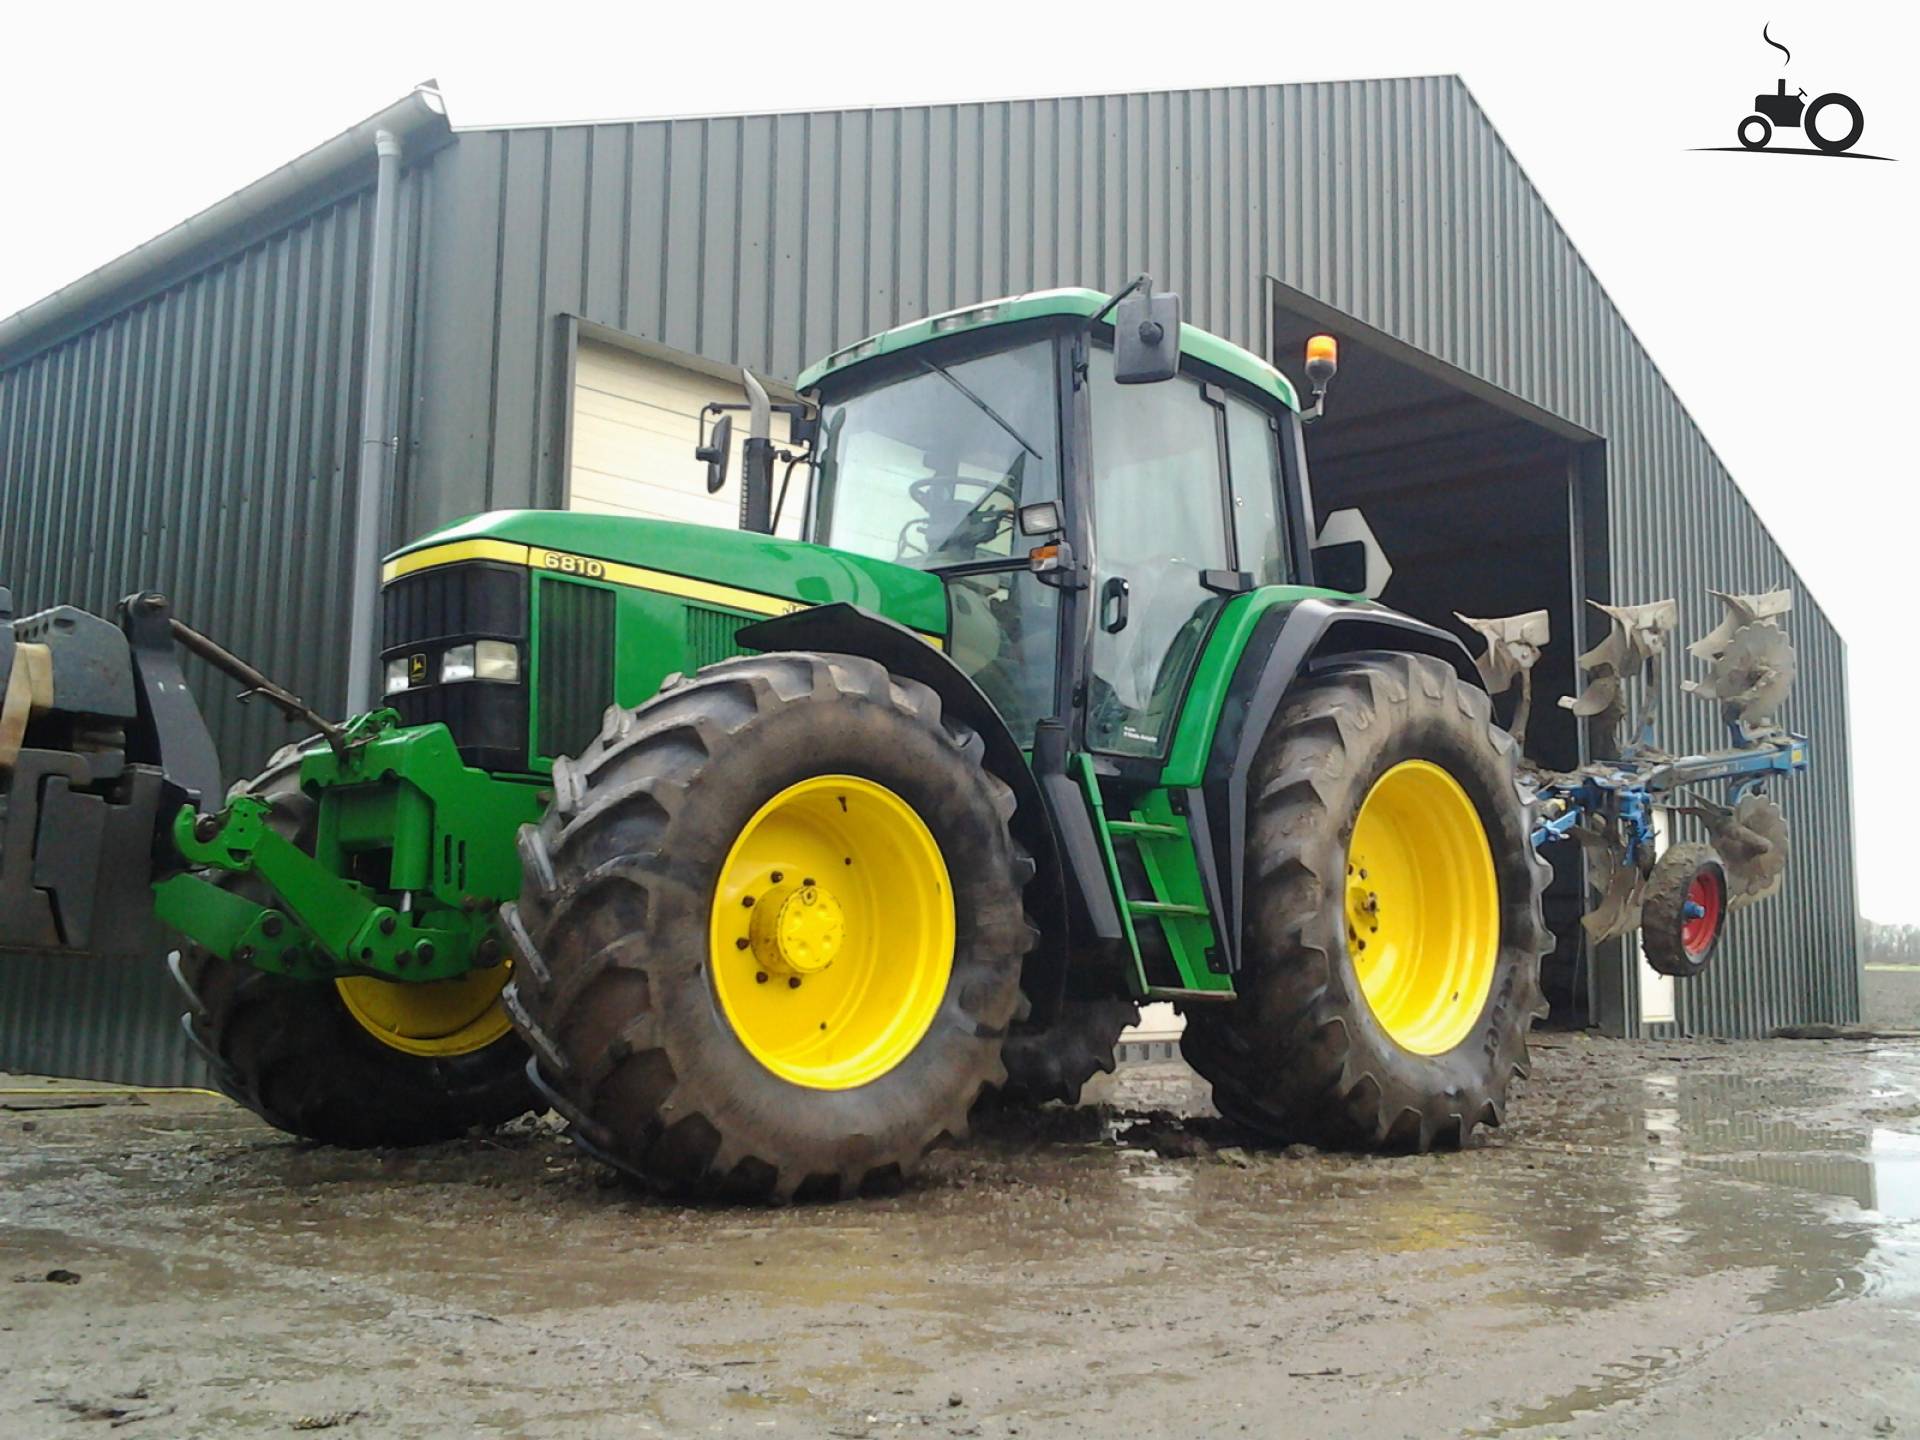 John Deere 6810 Specs and data - Everything about the John Deere 6810